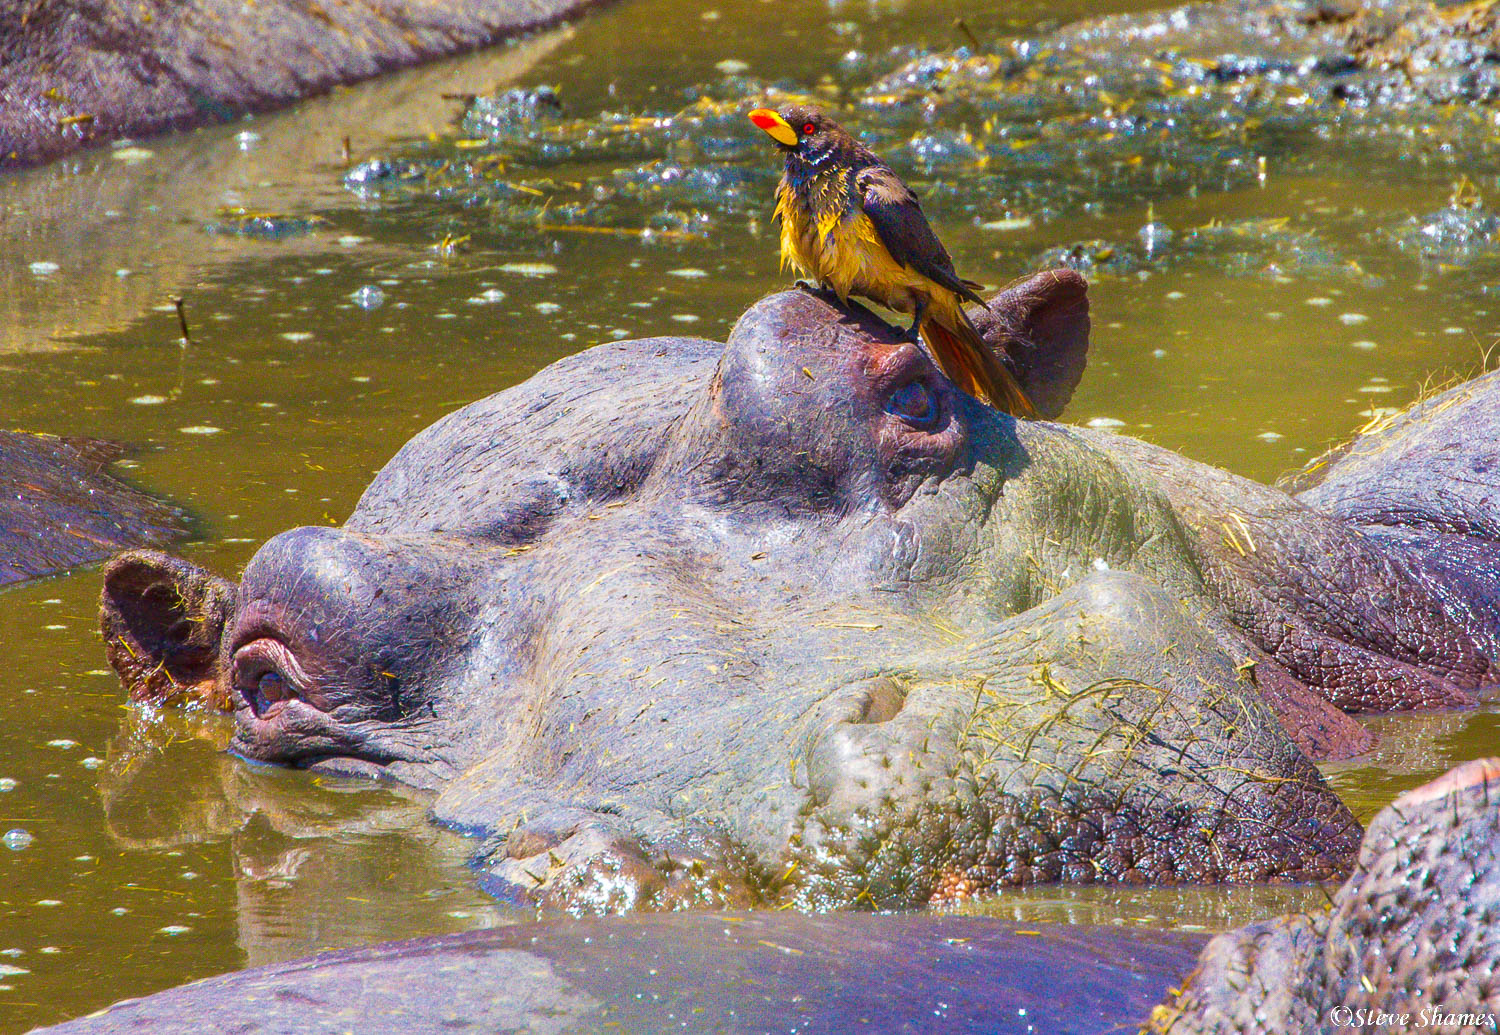 This oxpecker lands on a hippo island here.